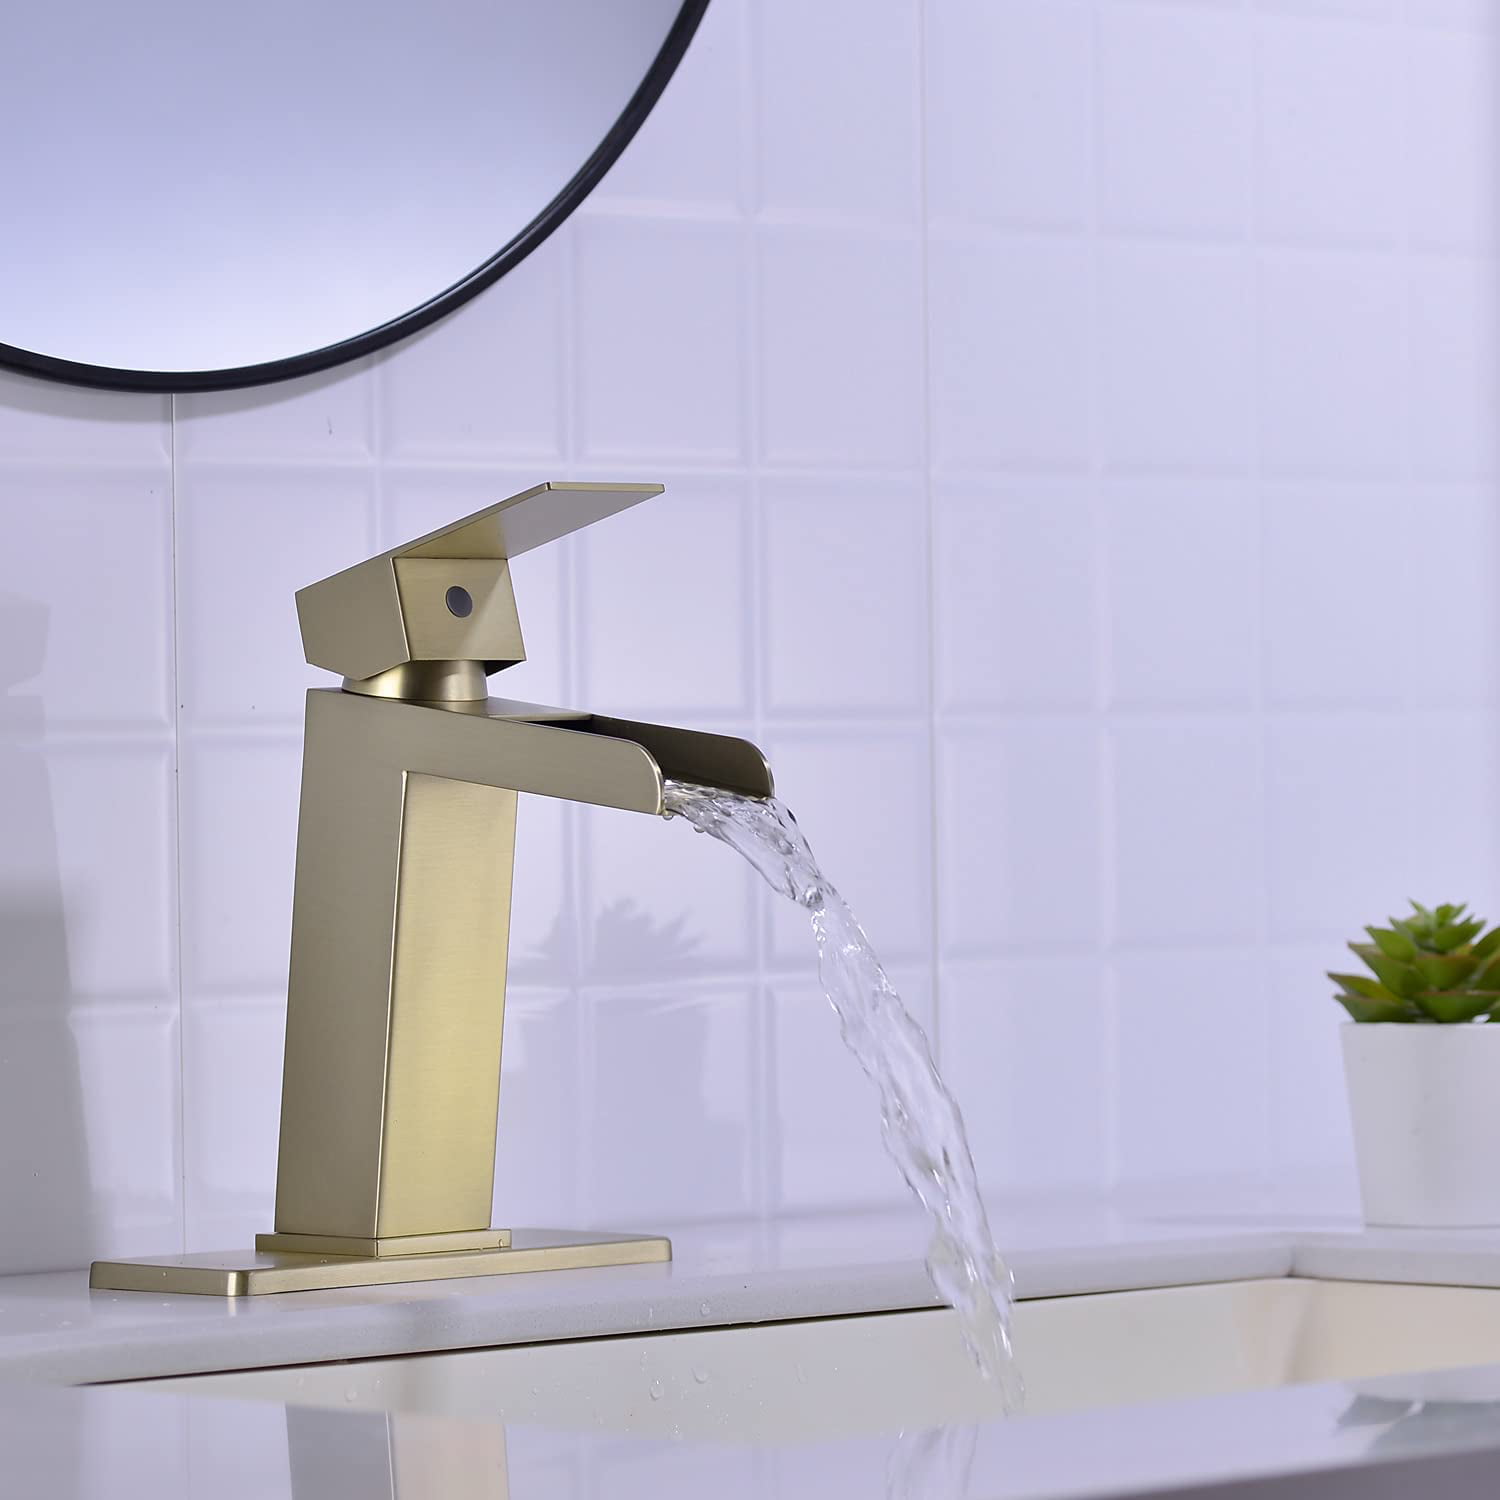 Overflow Pop Up Drain and cUPC Water Supply Lines Included Brushed Gold Single Handle Bathroom Sink Faucet with 6 Inch Deck Plate 1 Hole Deck Mounted Waterfall Vanity Faucet